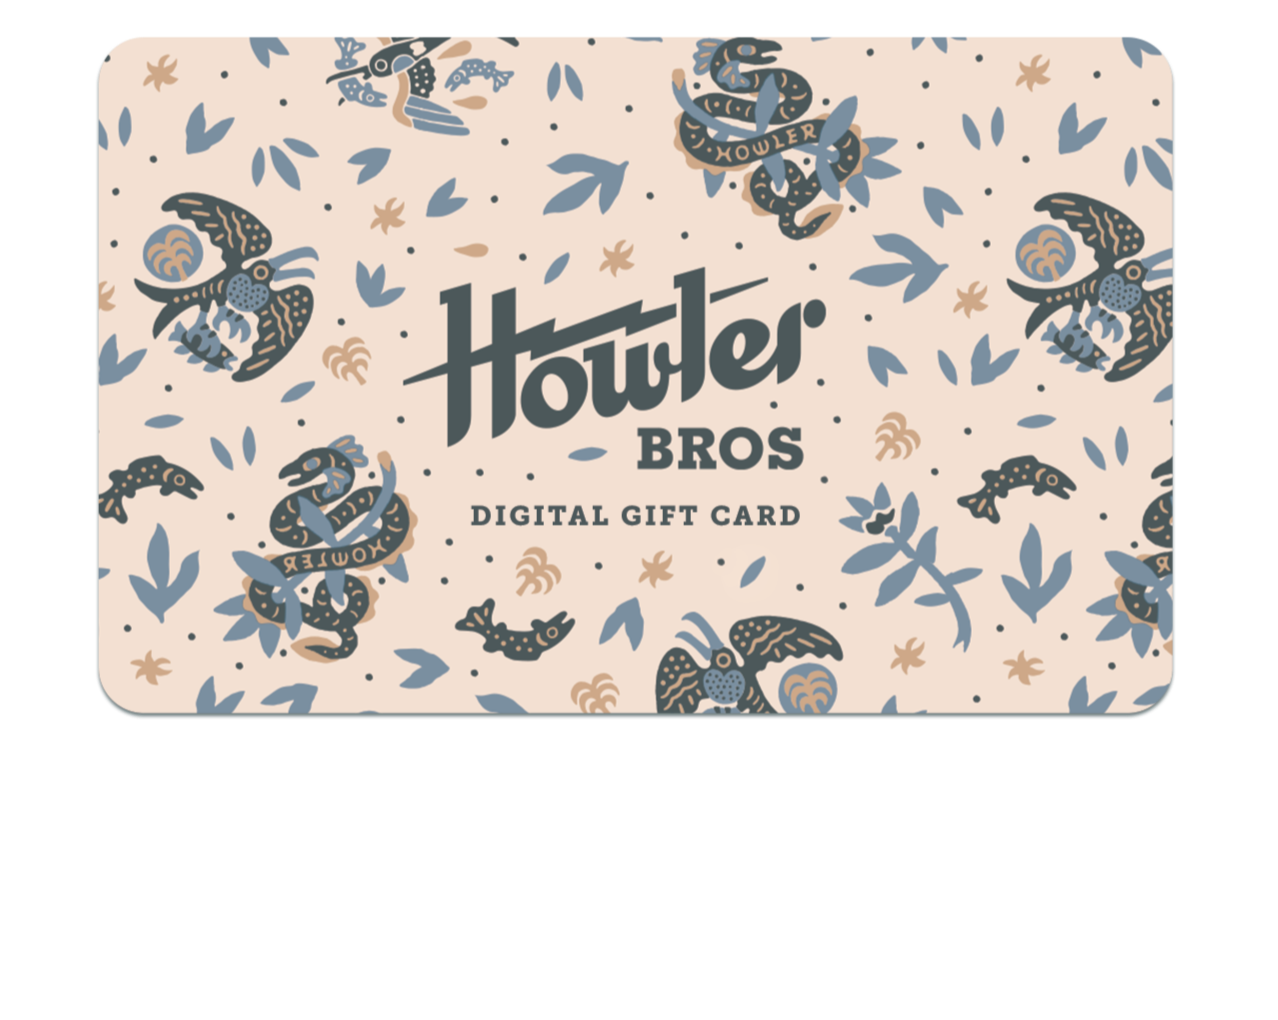 Howler Brothers Digital Gift Card